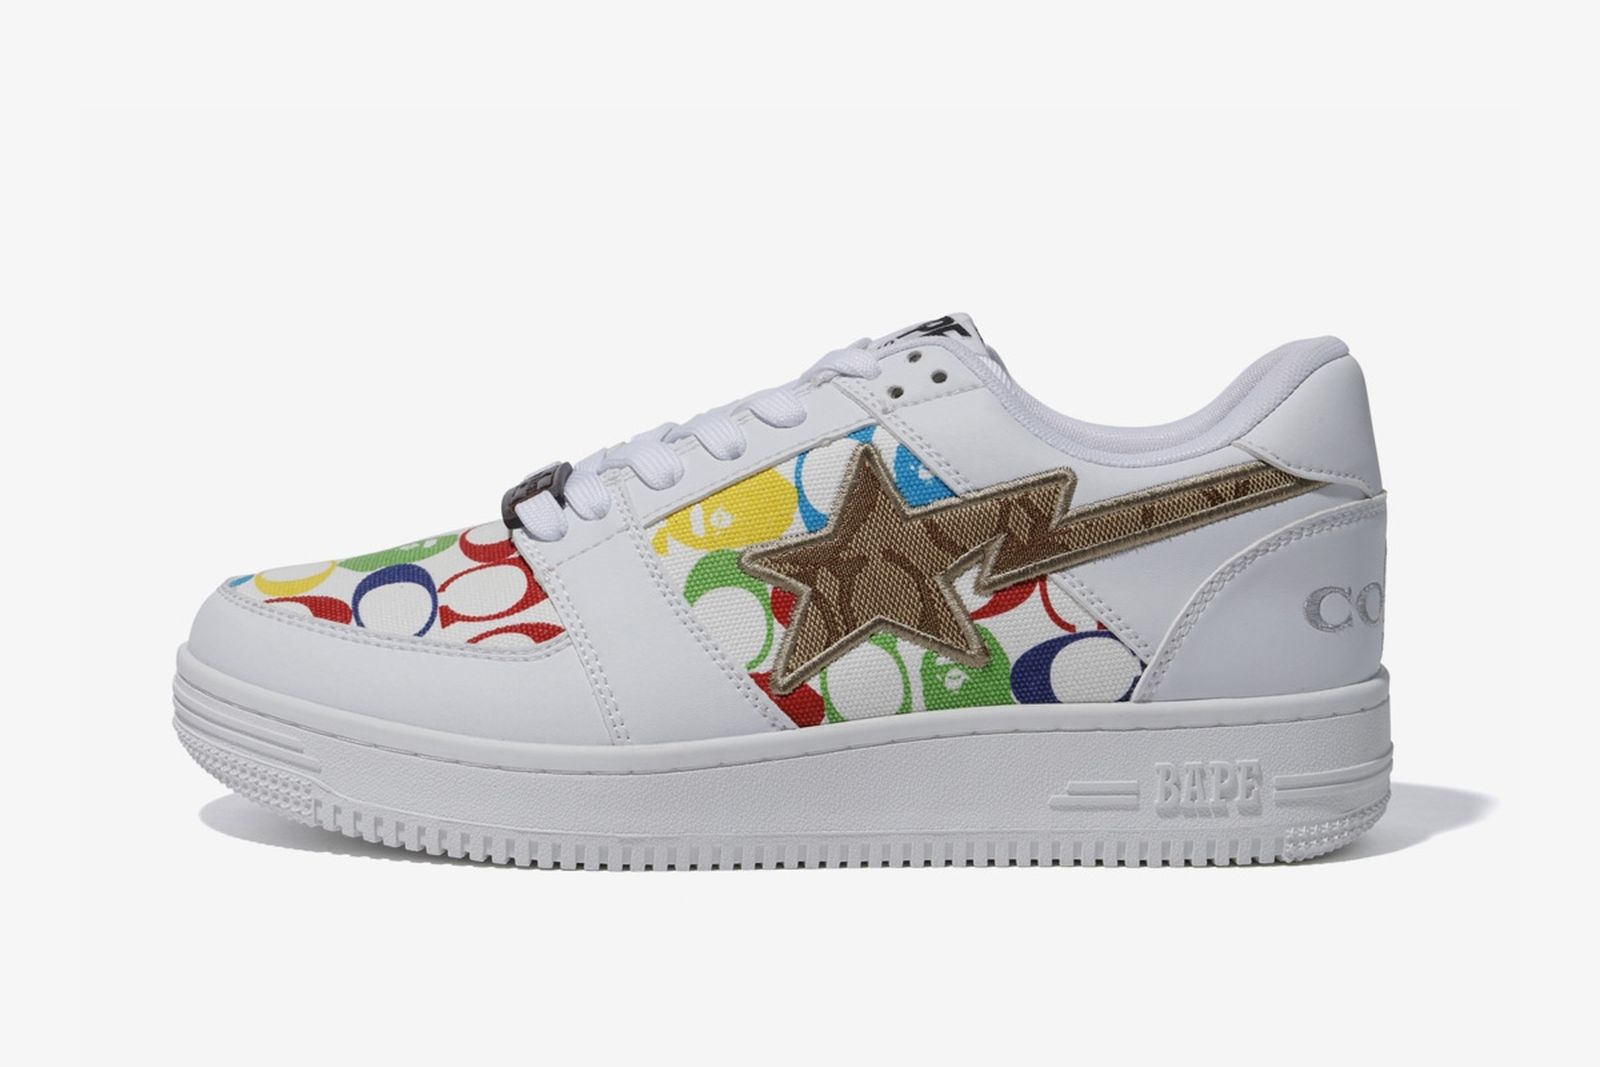 Coach x A Bathing Ape BAPE STA: Release Info and Official Image